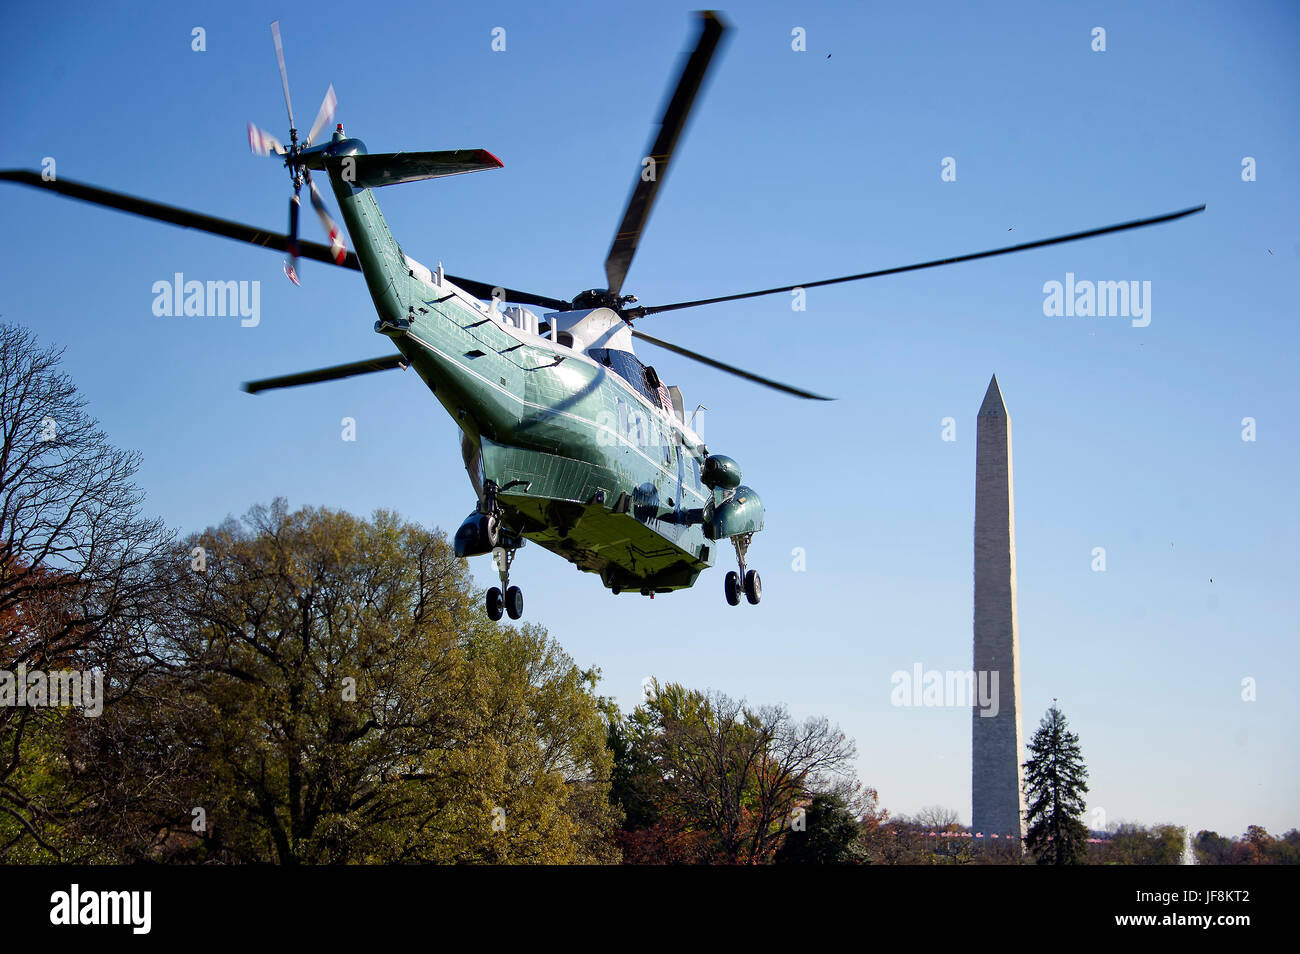 Marine One, with United States President Barack Obama aboard, departs the White House in Washington, DC en route to Joint Base Andrews in Maryland from where the President will fly to Turkey for the G20 Summit on Saturday, November 14, 2015. Credit: Ron Sachs / Pool via CNP /MediaPunch Stock Photo